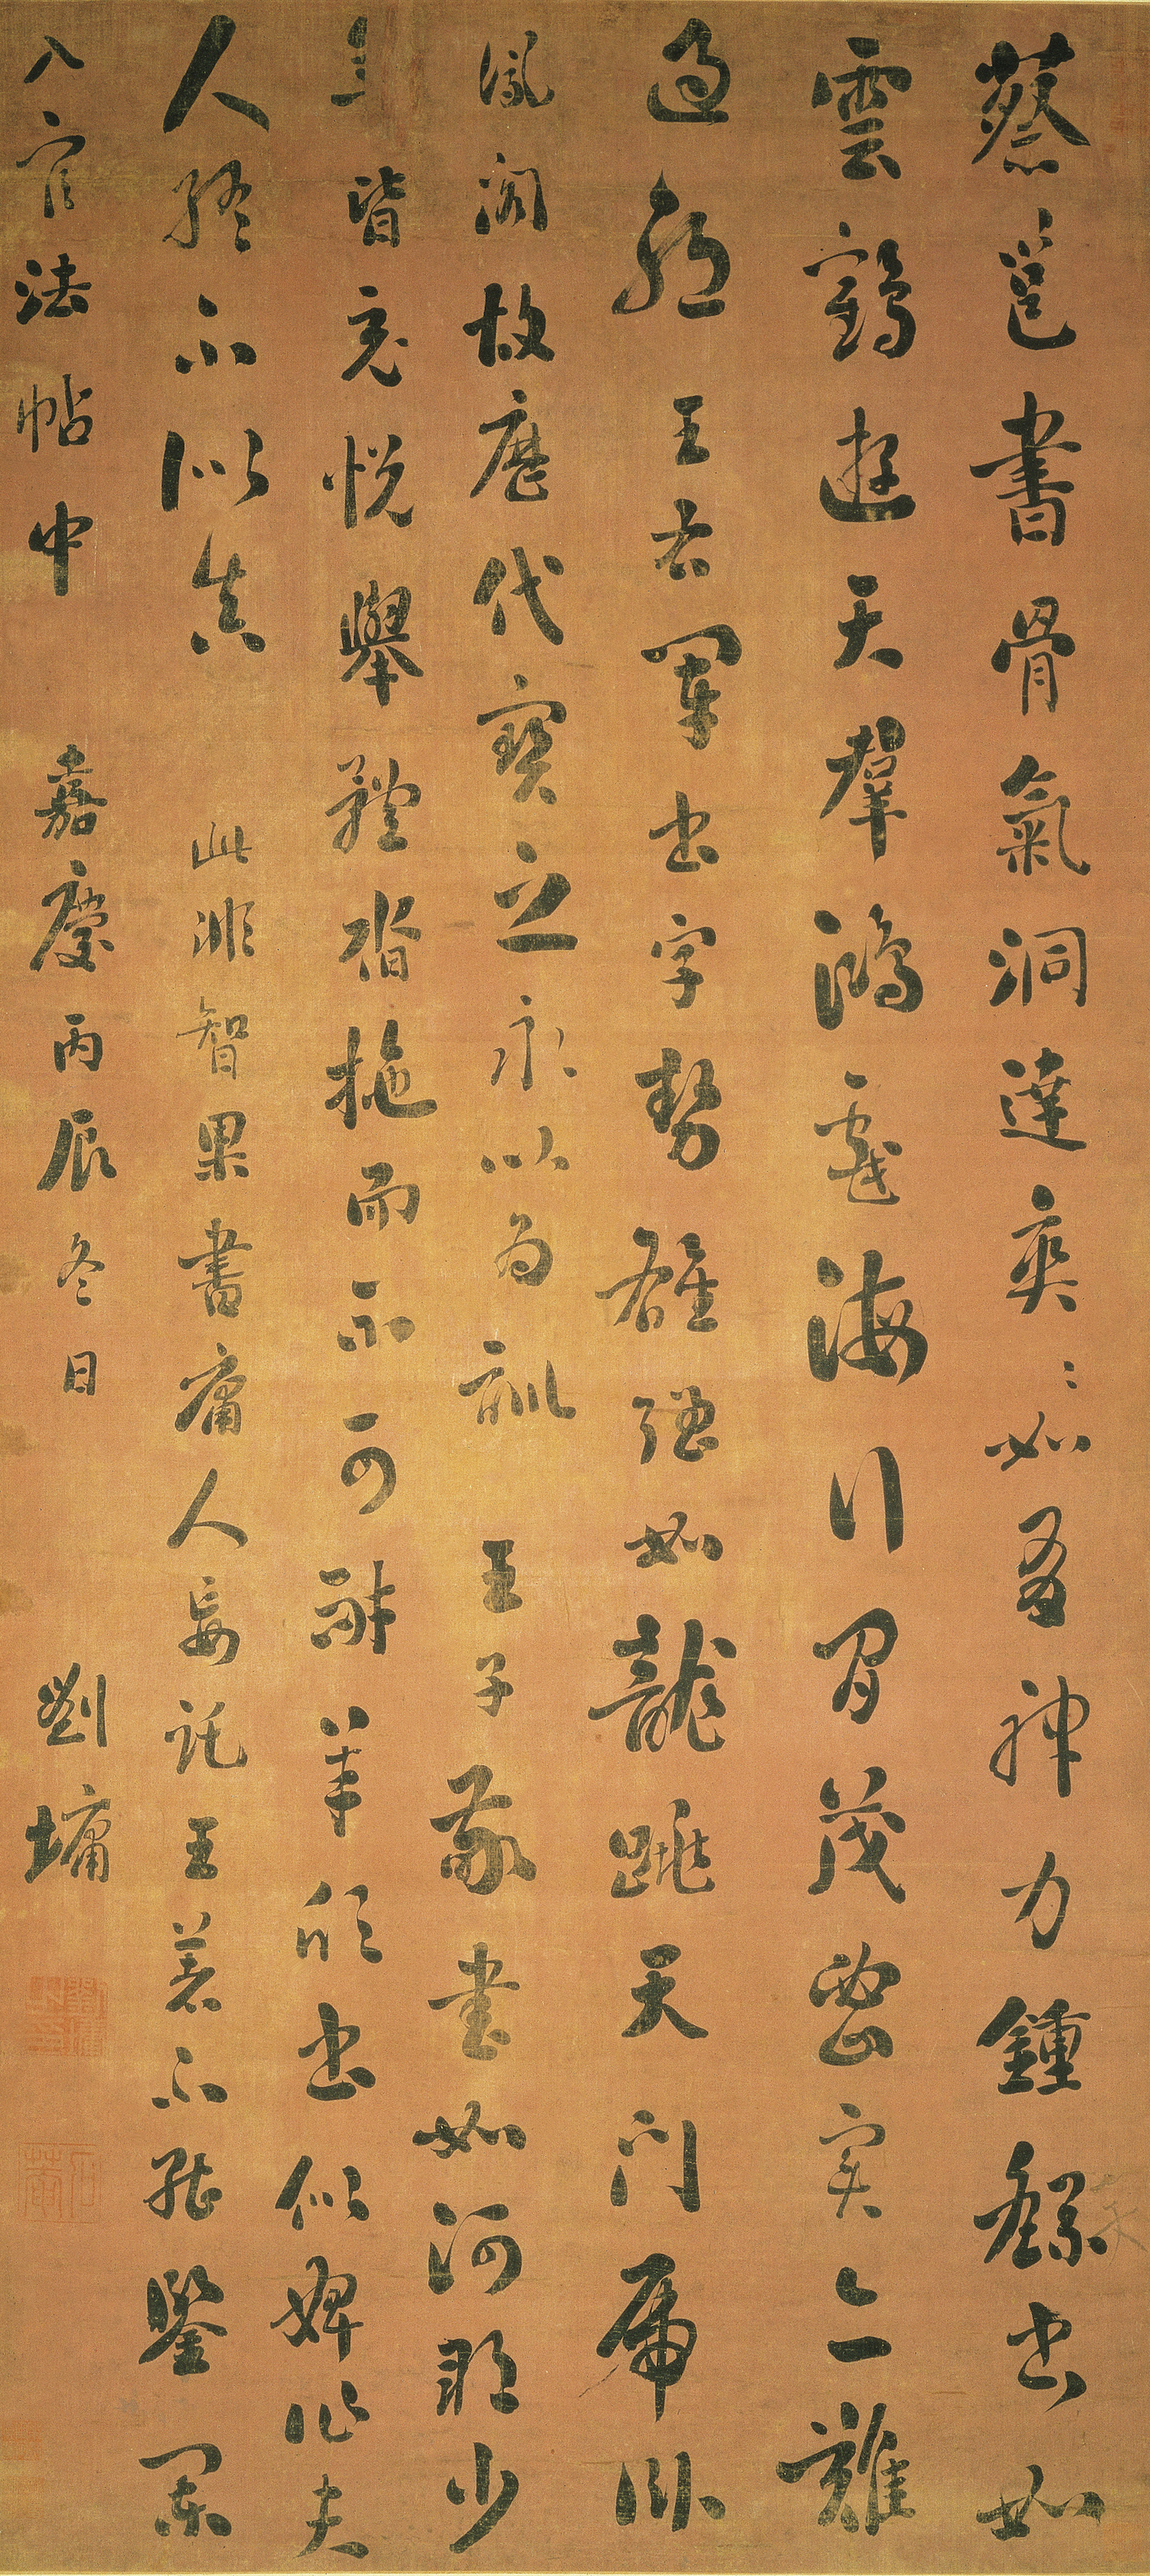 Other Calligraphy in National Palace Museum, part1